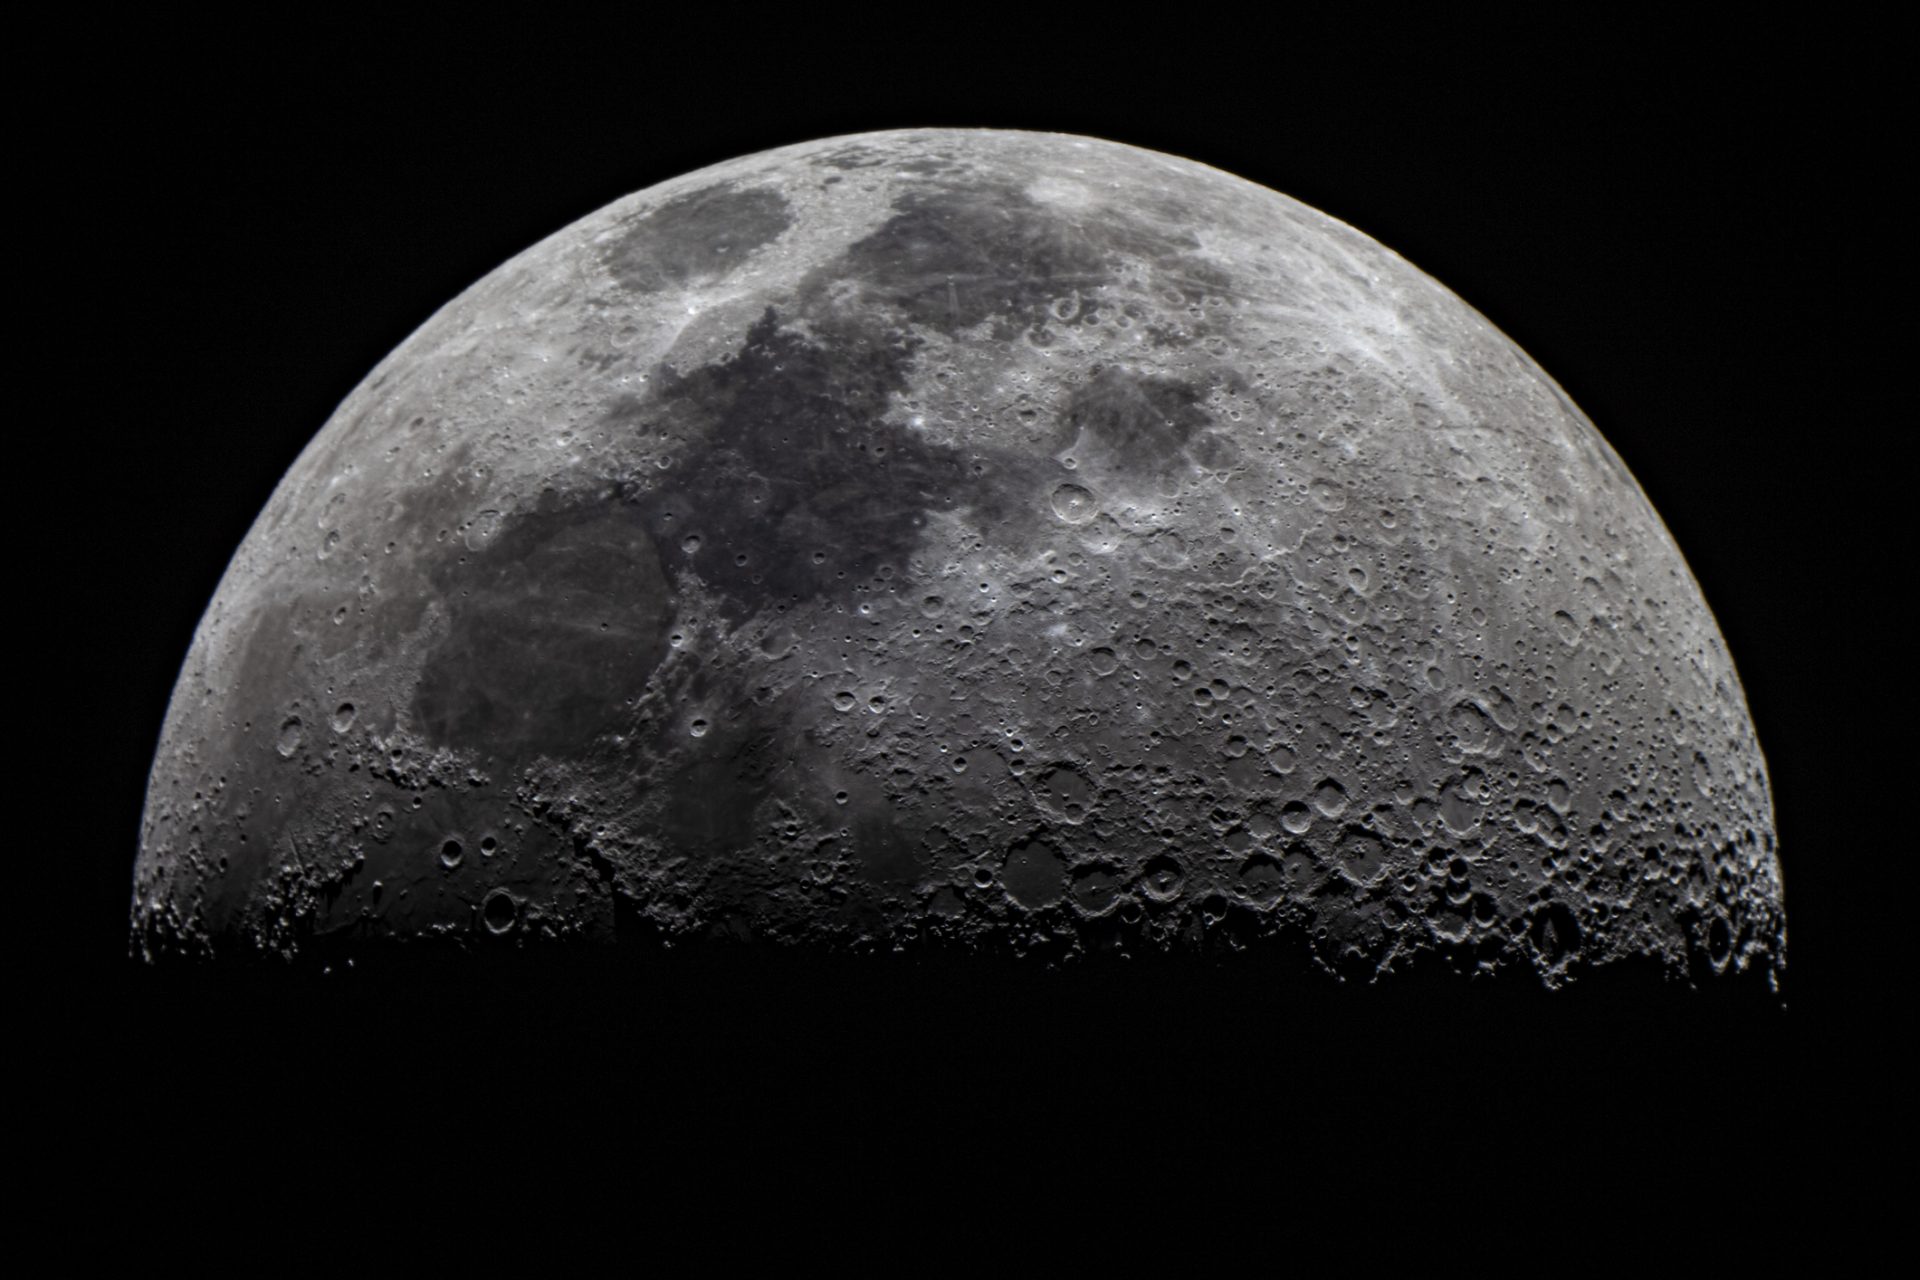 The world's superpowers could fight over the moon someday